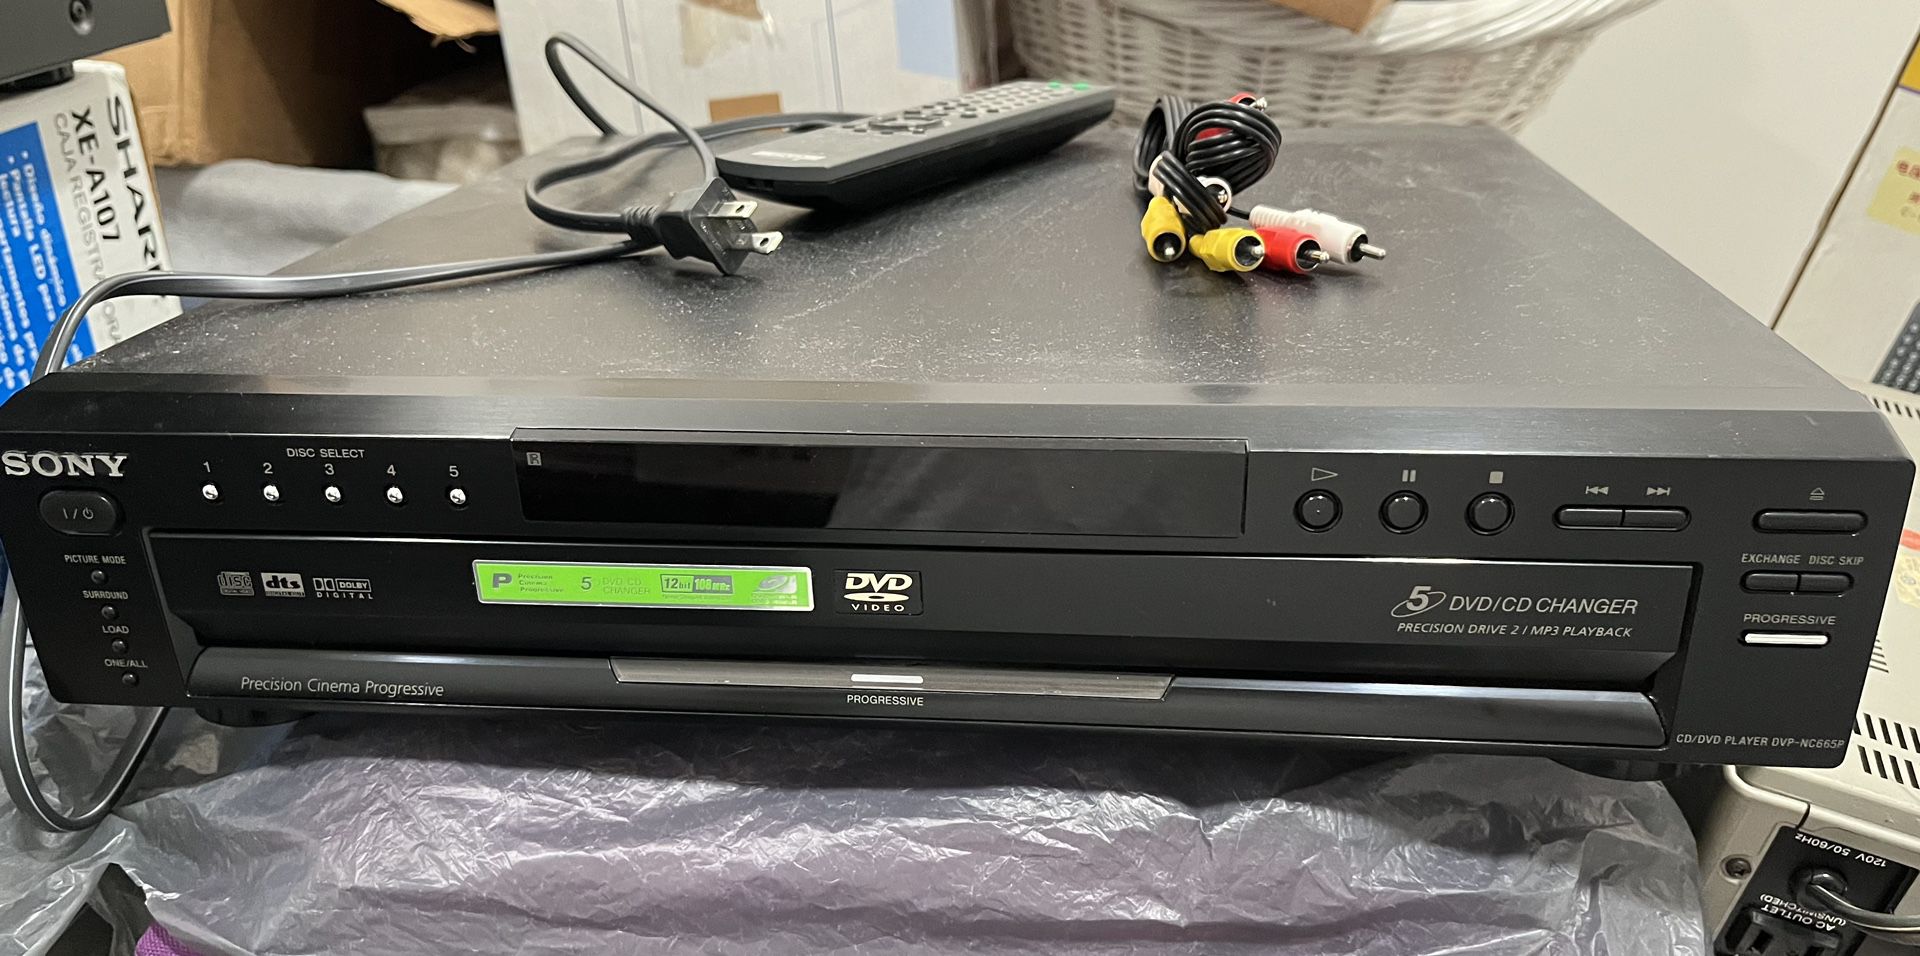 WORKING Sony 5 CD DVD Changer MP3 Model DVP-NC665P With Remote Control RCA Cable